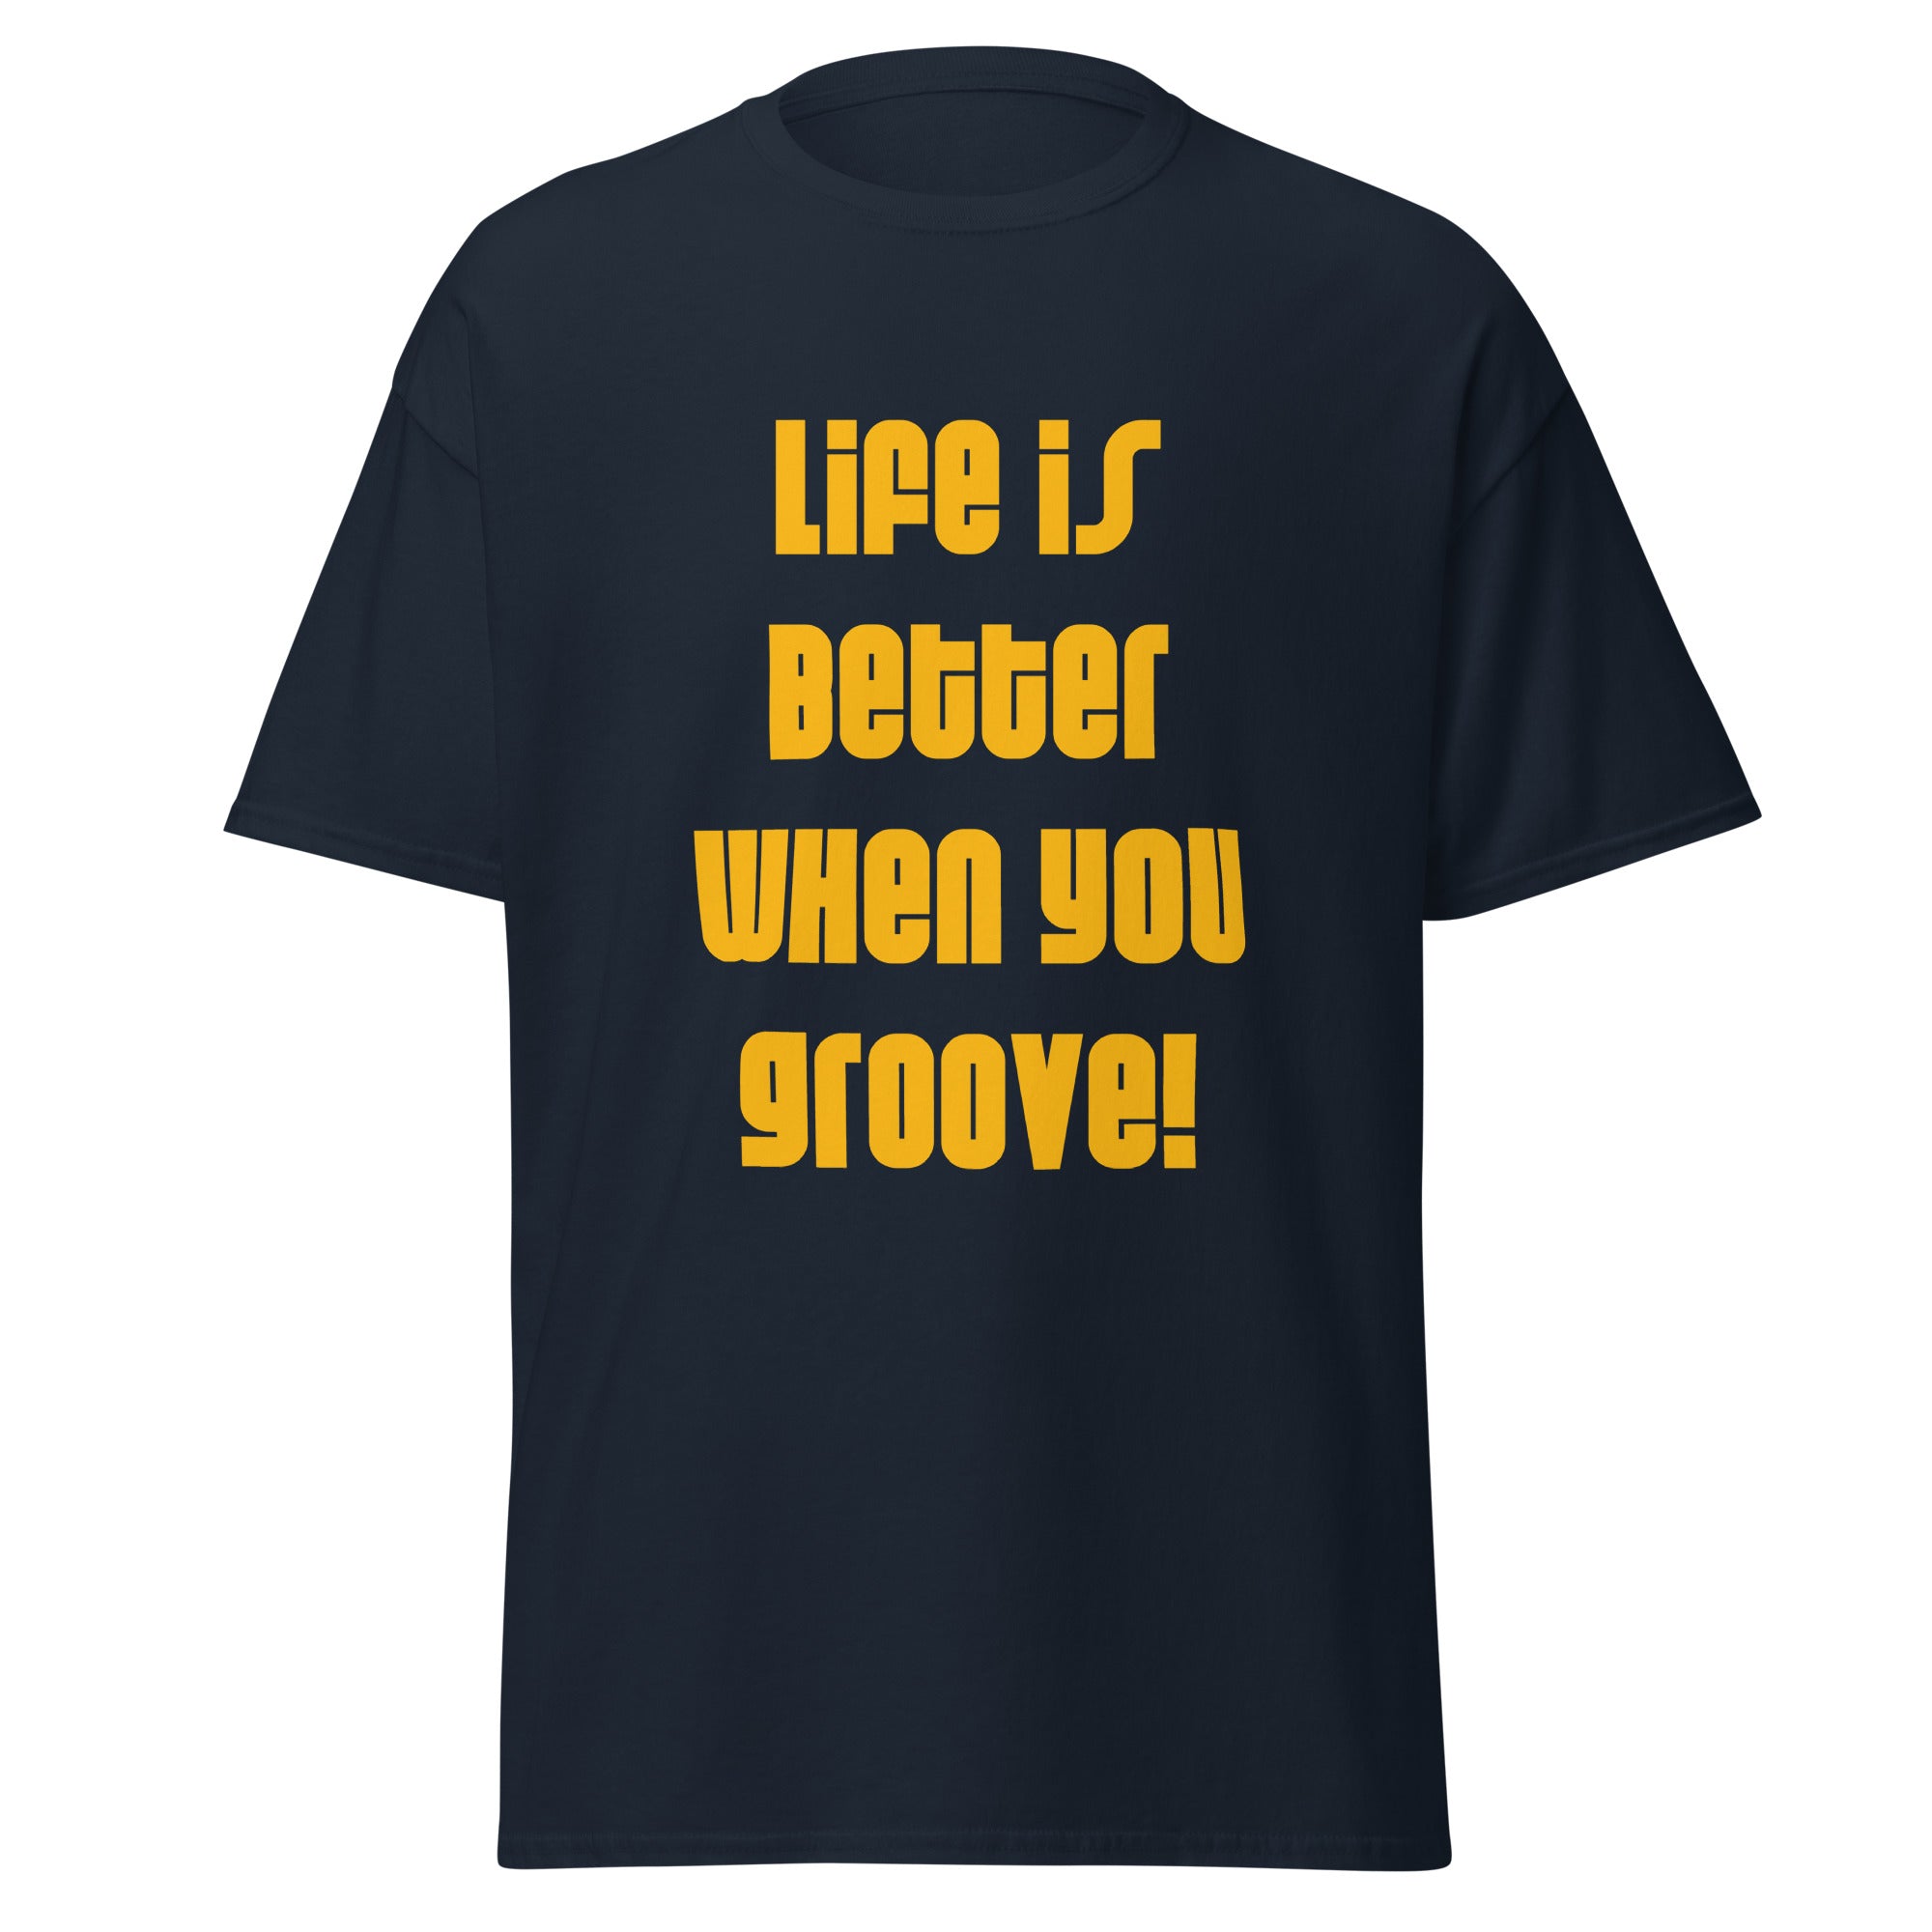 LIFE IS BETTER WHEN YOU GROOVE Short-Sleeve T-Shirt